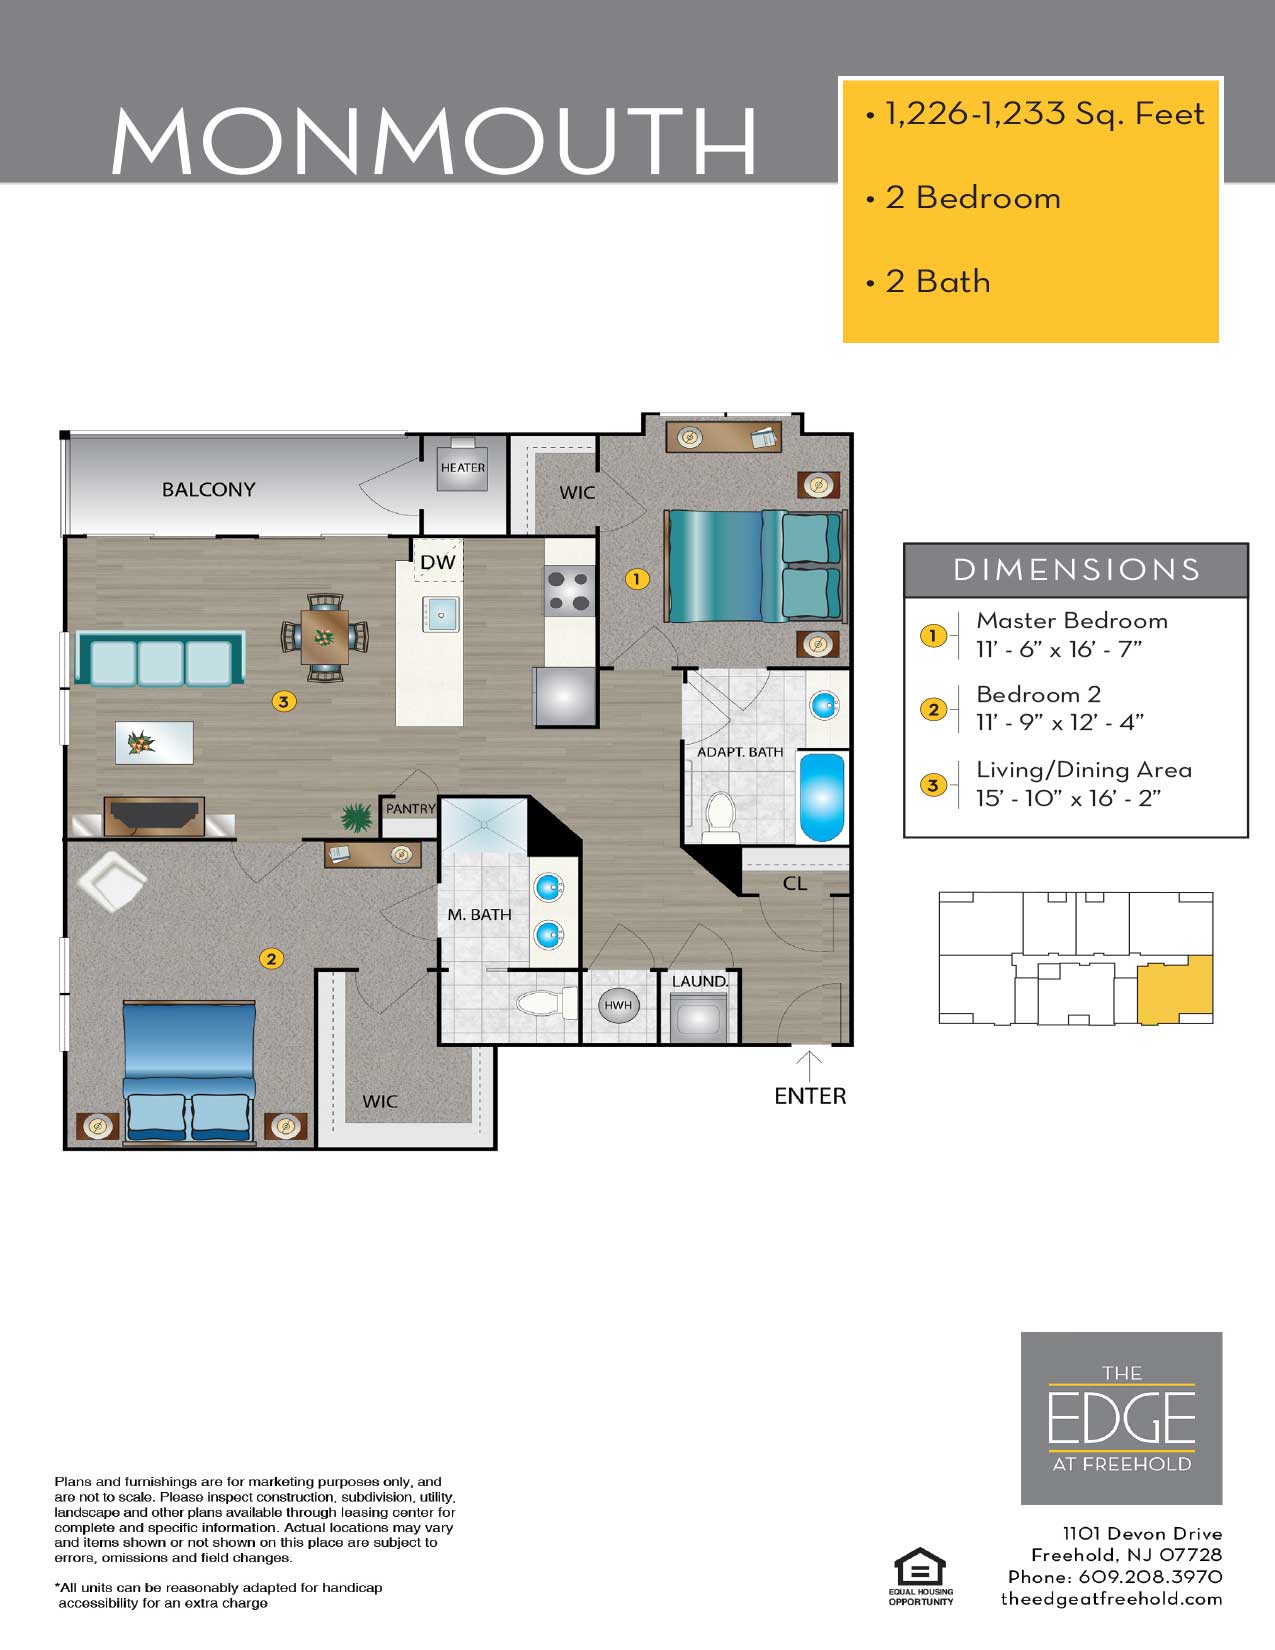 The Edge At Freehold Floor Plan Monmouth